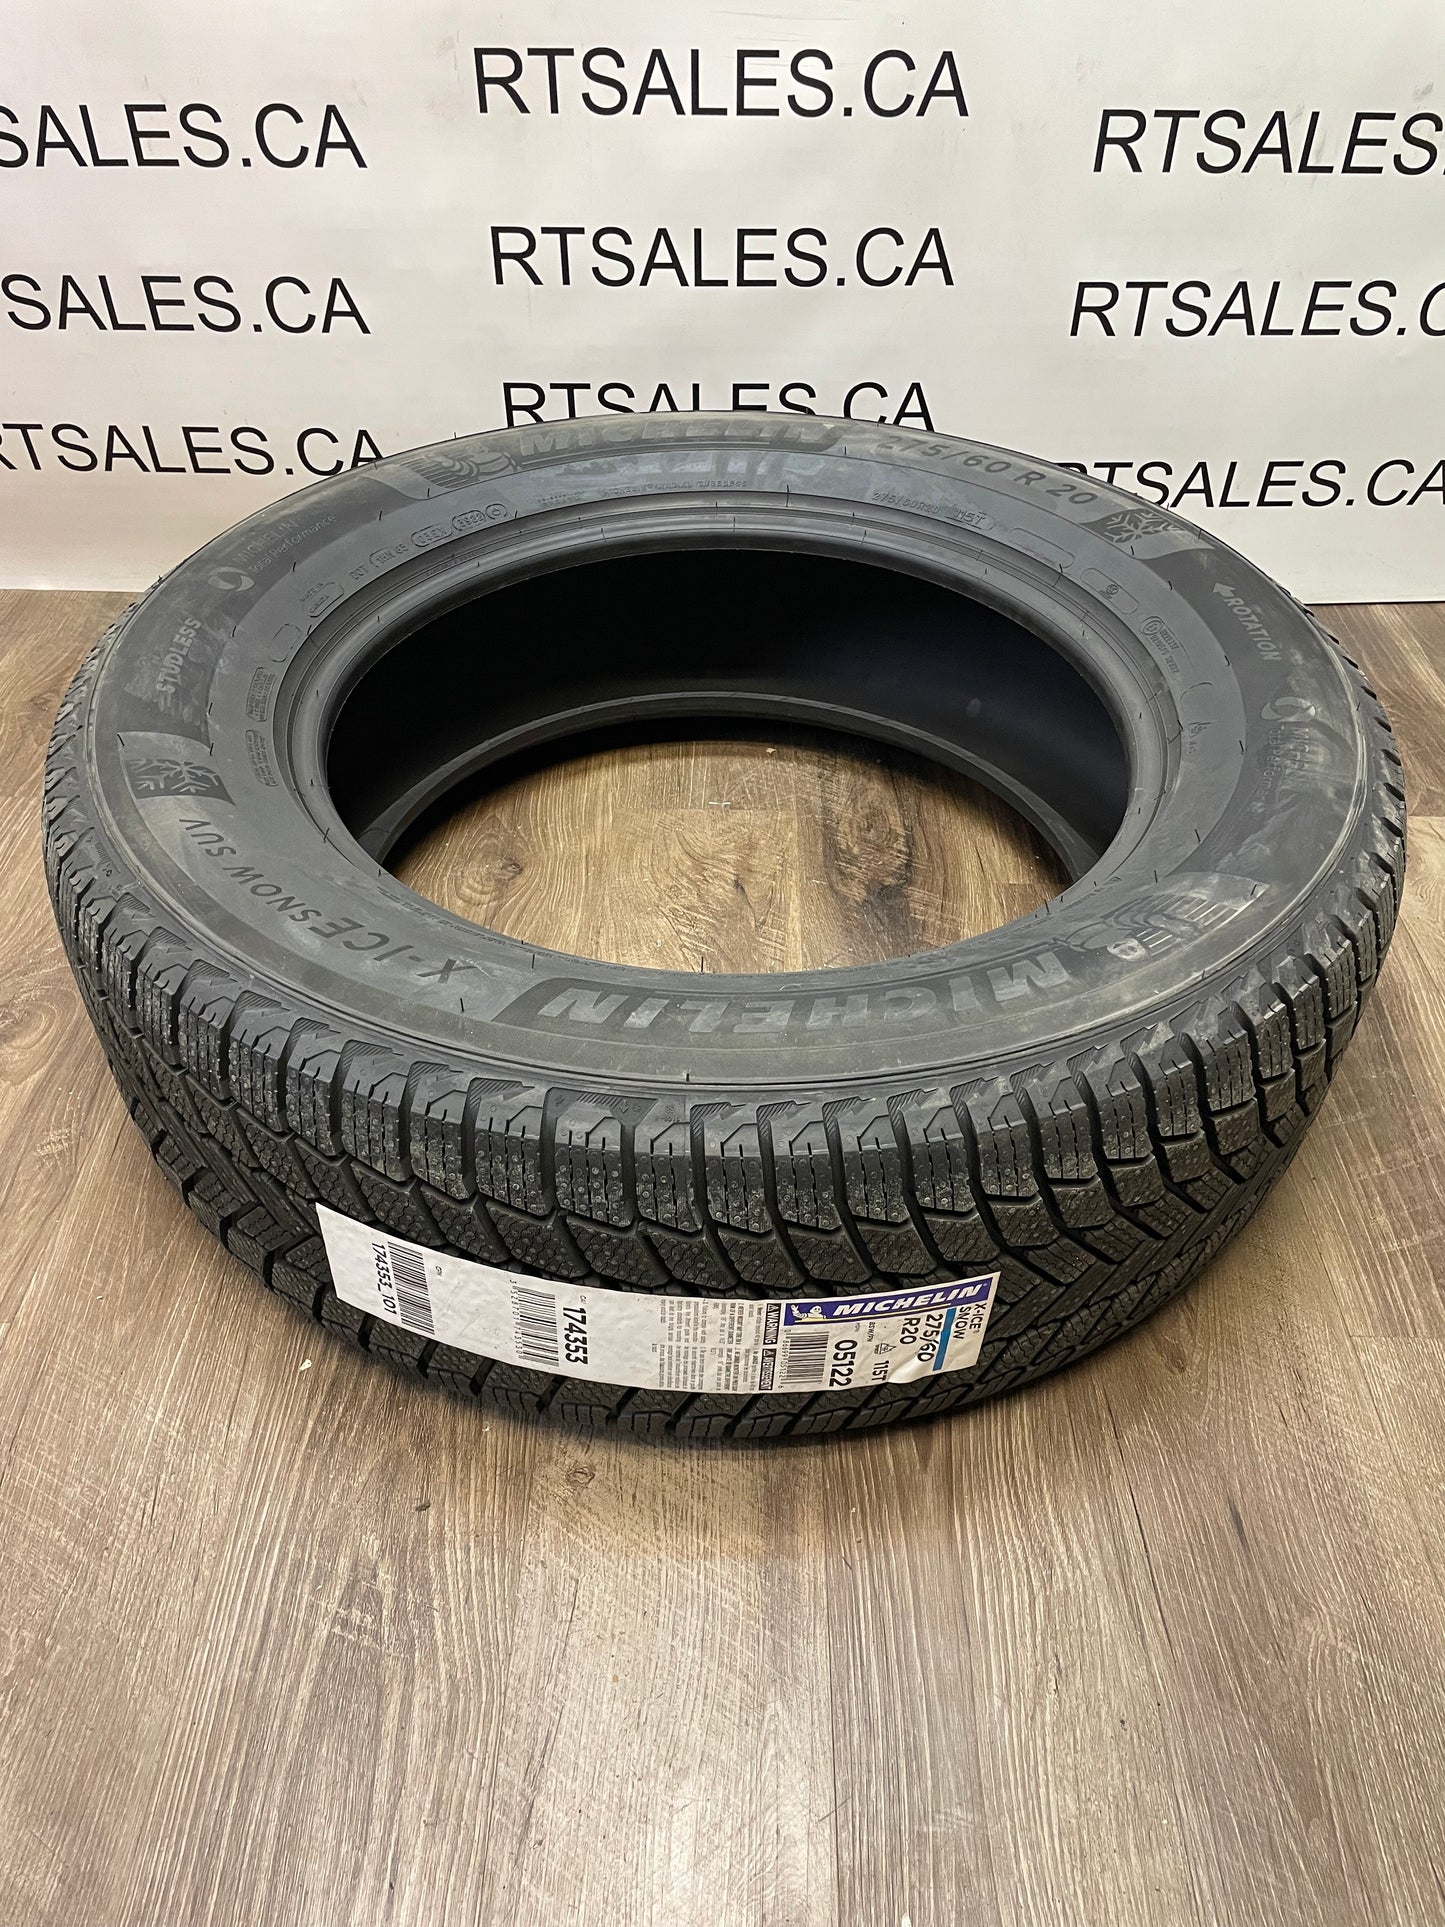 275/60/20 Michelin X-Ice Winter (Set of Four)